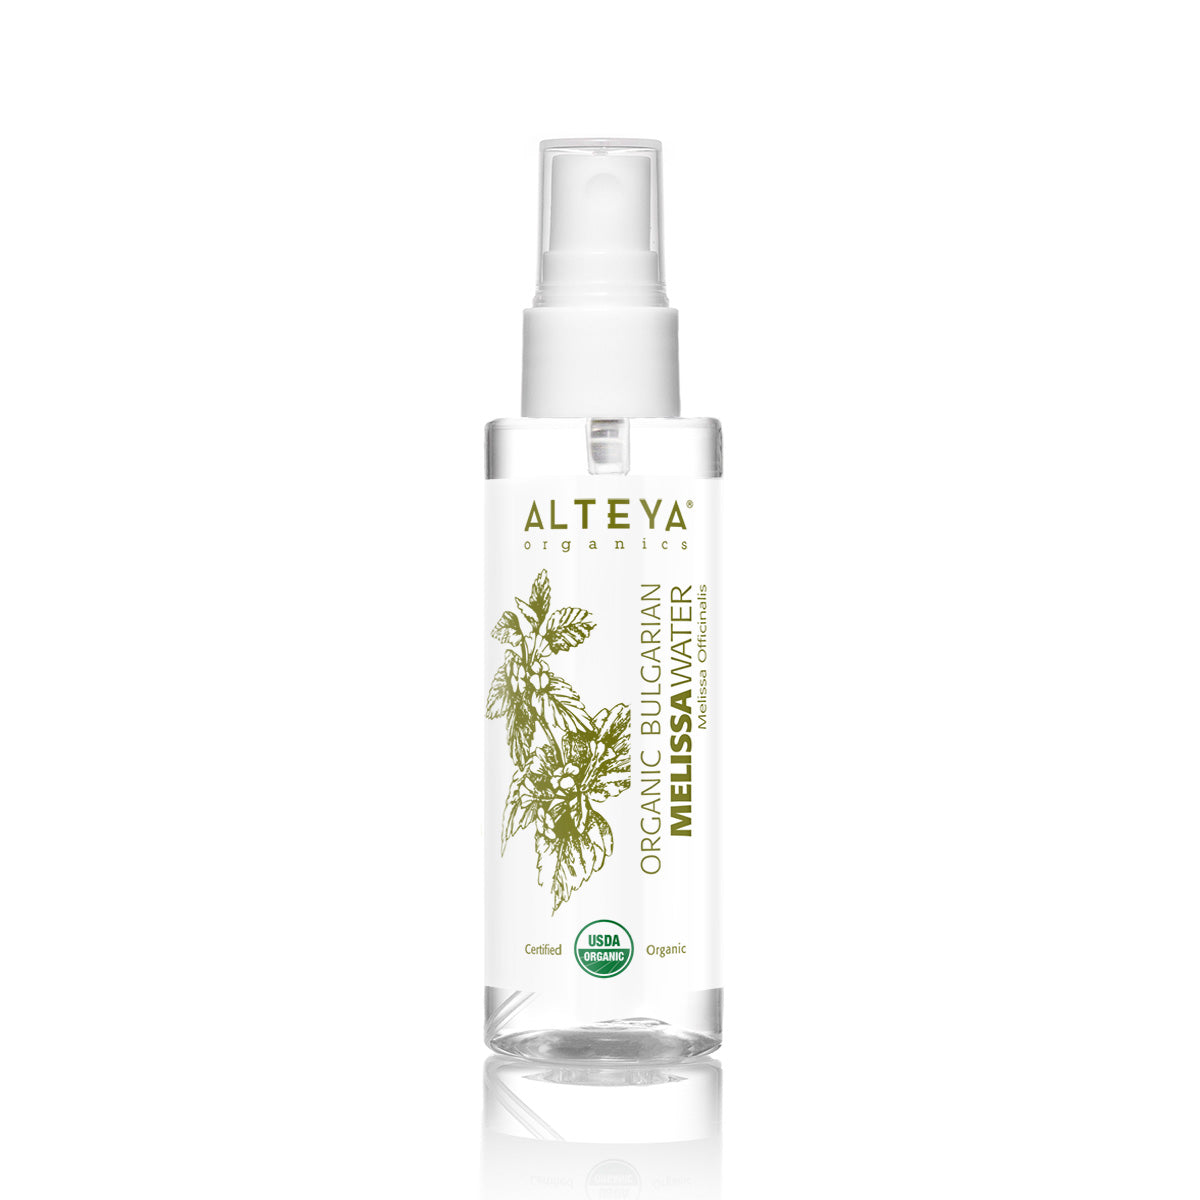 A bottle of Bulgarian Melissa Water, an Alteya Organics face and body mist crafted through steam distillation. This rejuvenating mist nourishes and hydrates the skin, leaving it refreshed and revitalized.